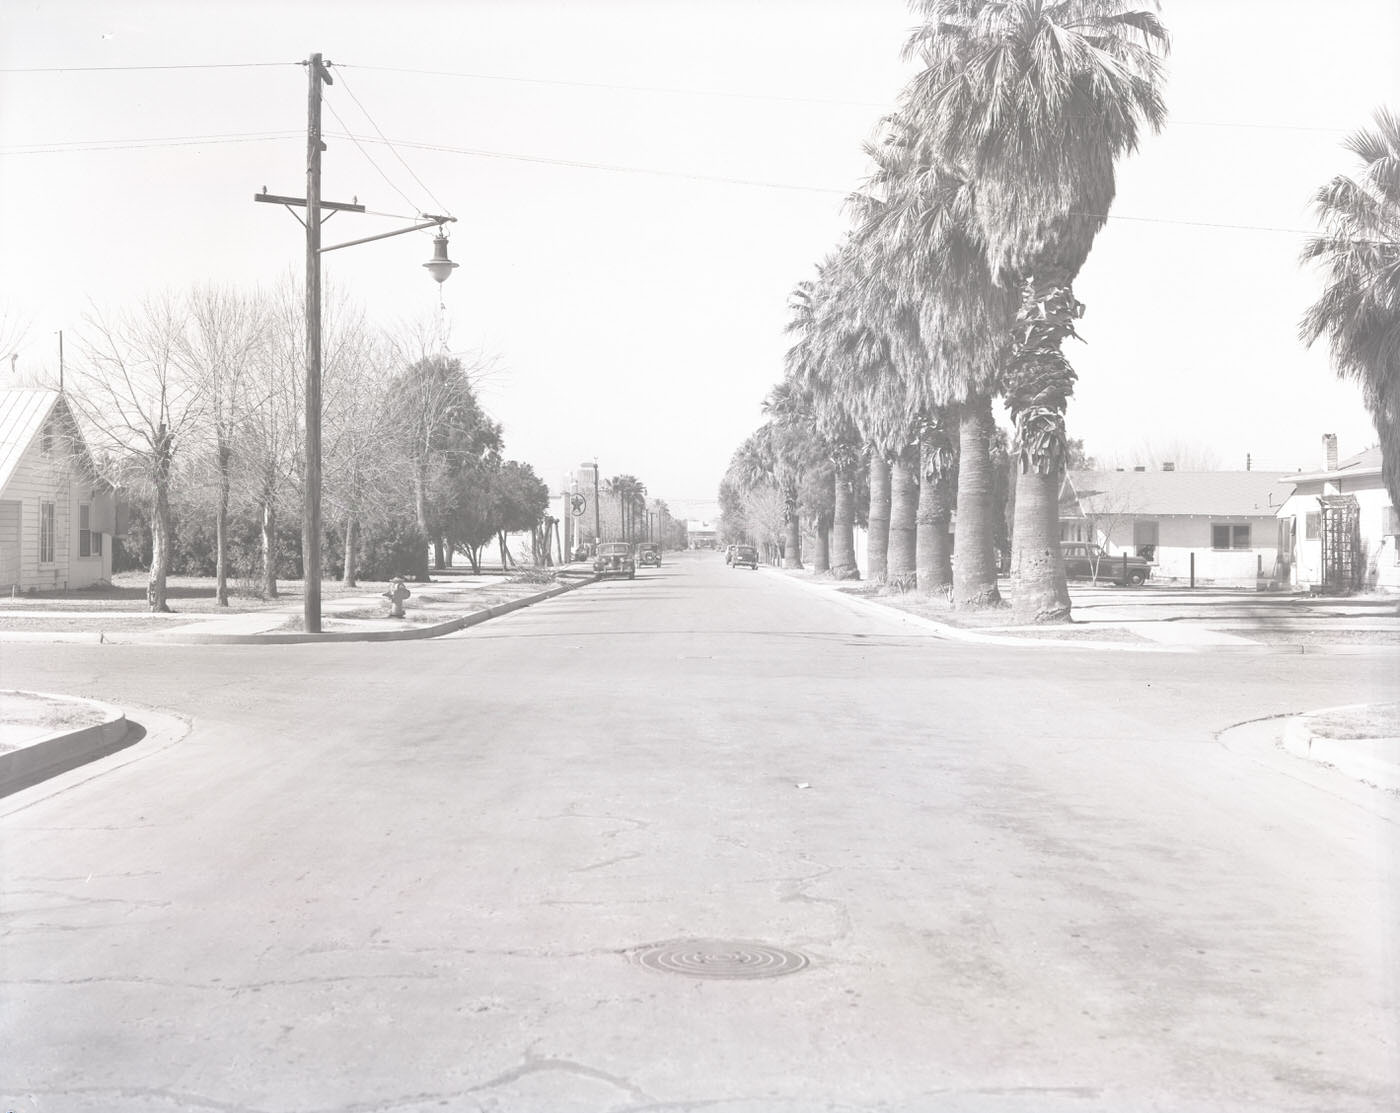 Intersection of E. Pierce and N. 11th Streets, 1946